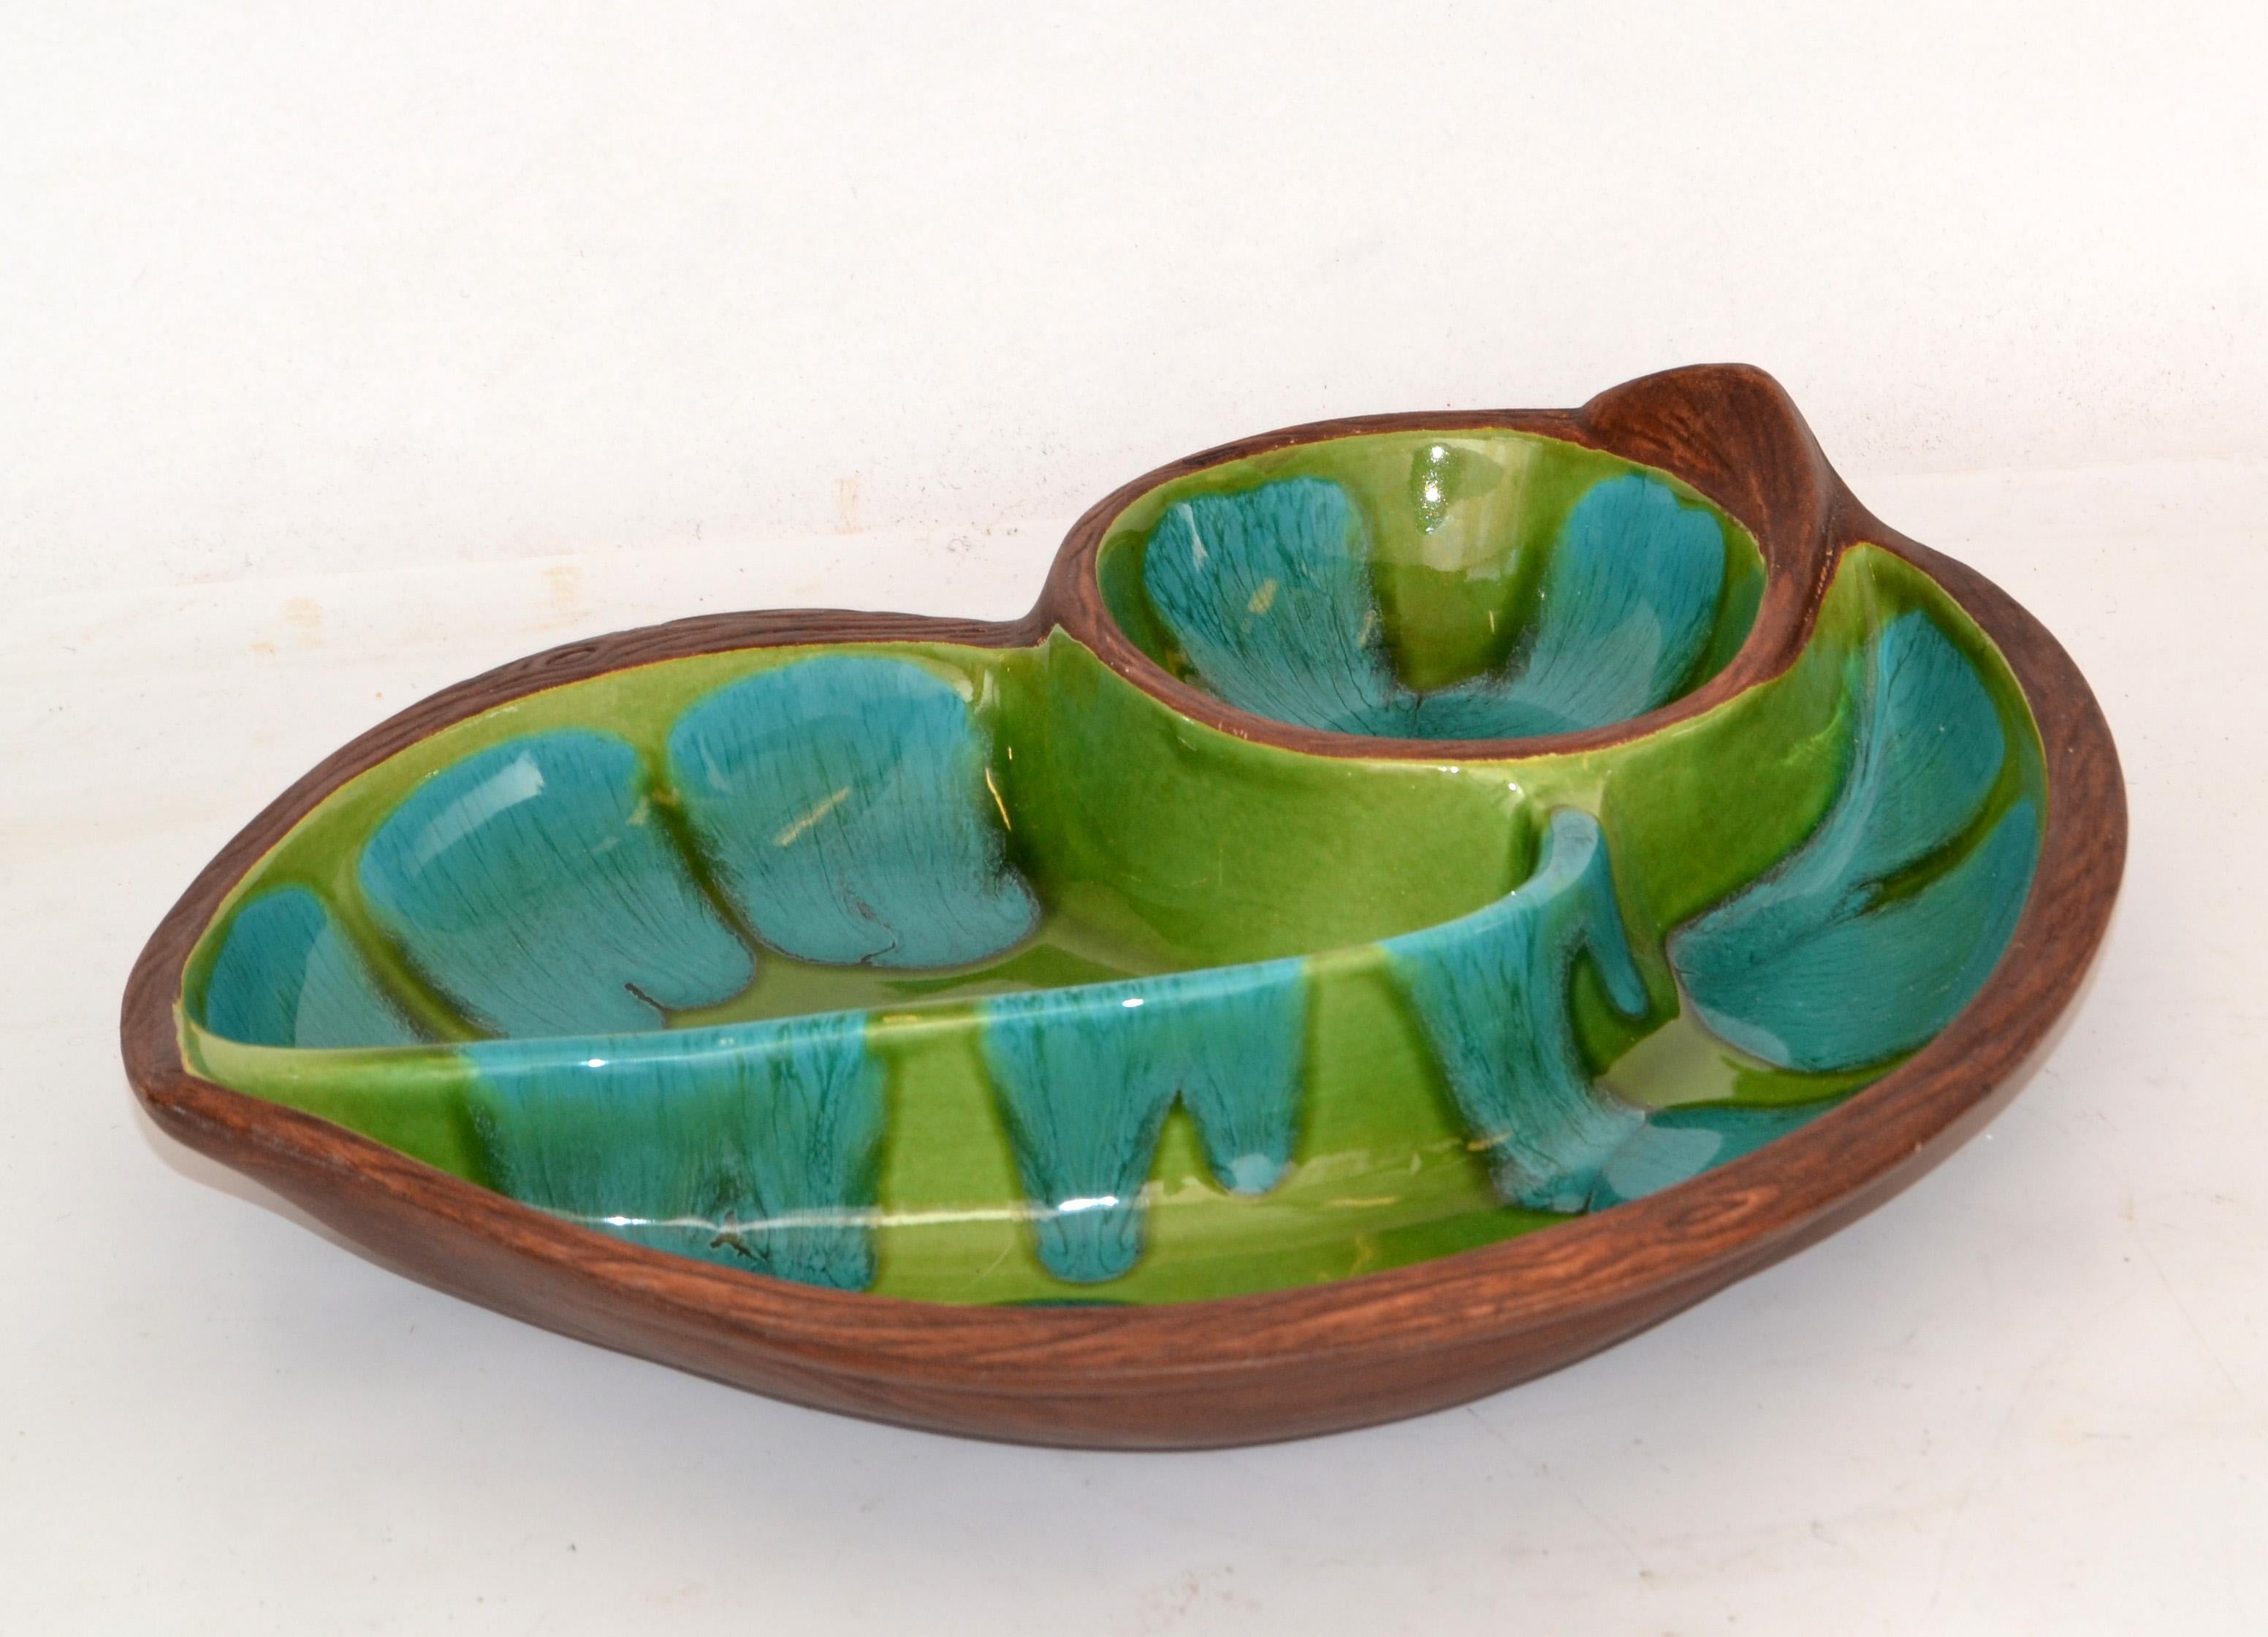 Brown Green Turquoise Glazed Ceramic Pottery Dish Mid-Century Modern, USA For Sale 7